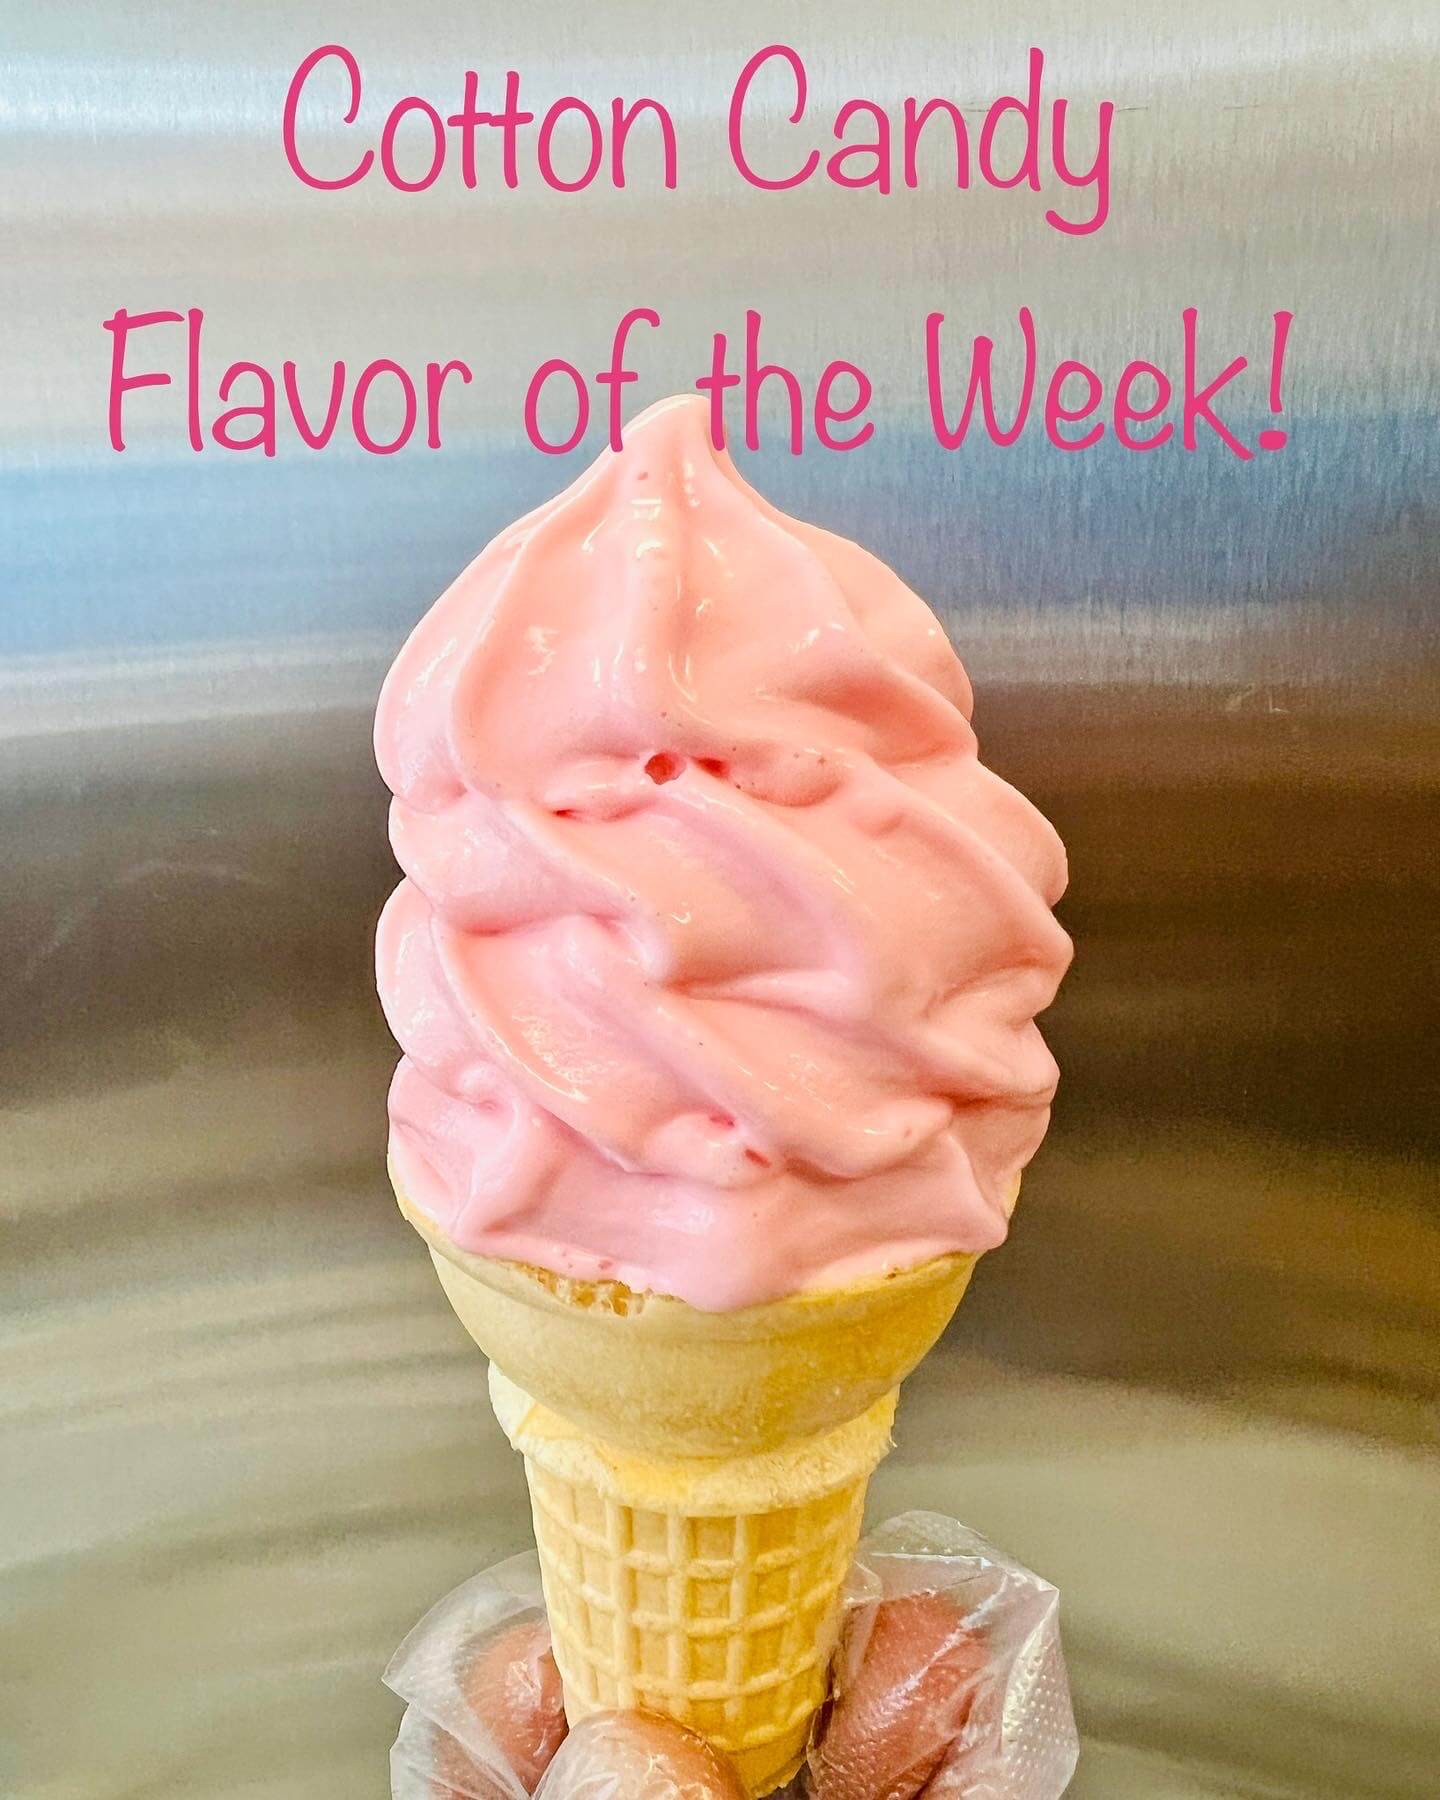 Flavor of the Week: Cotton Candy